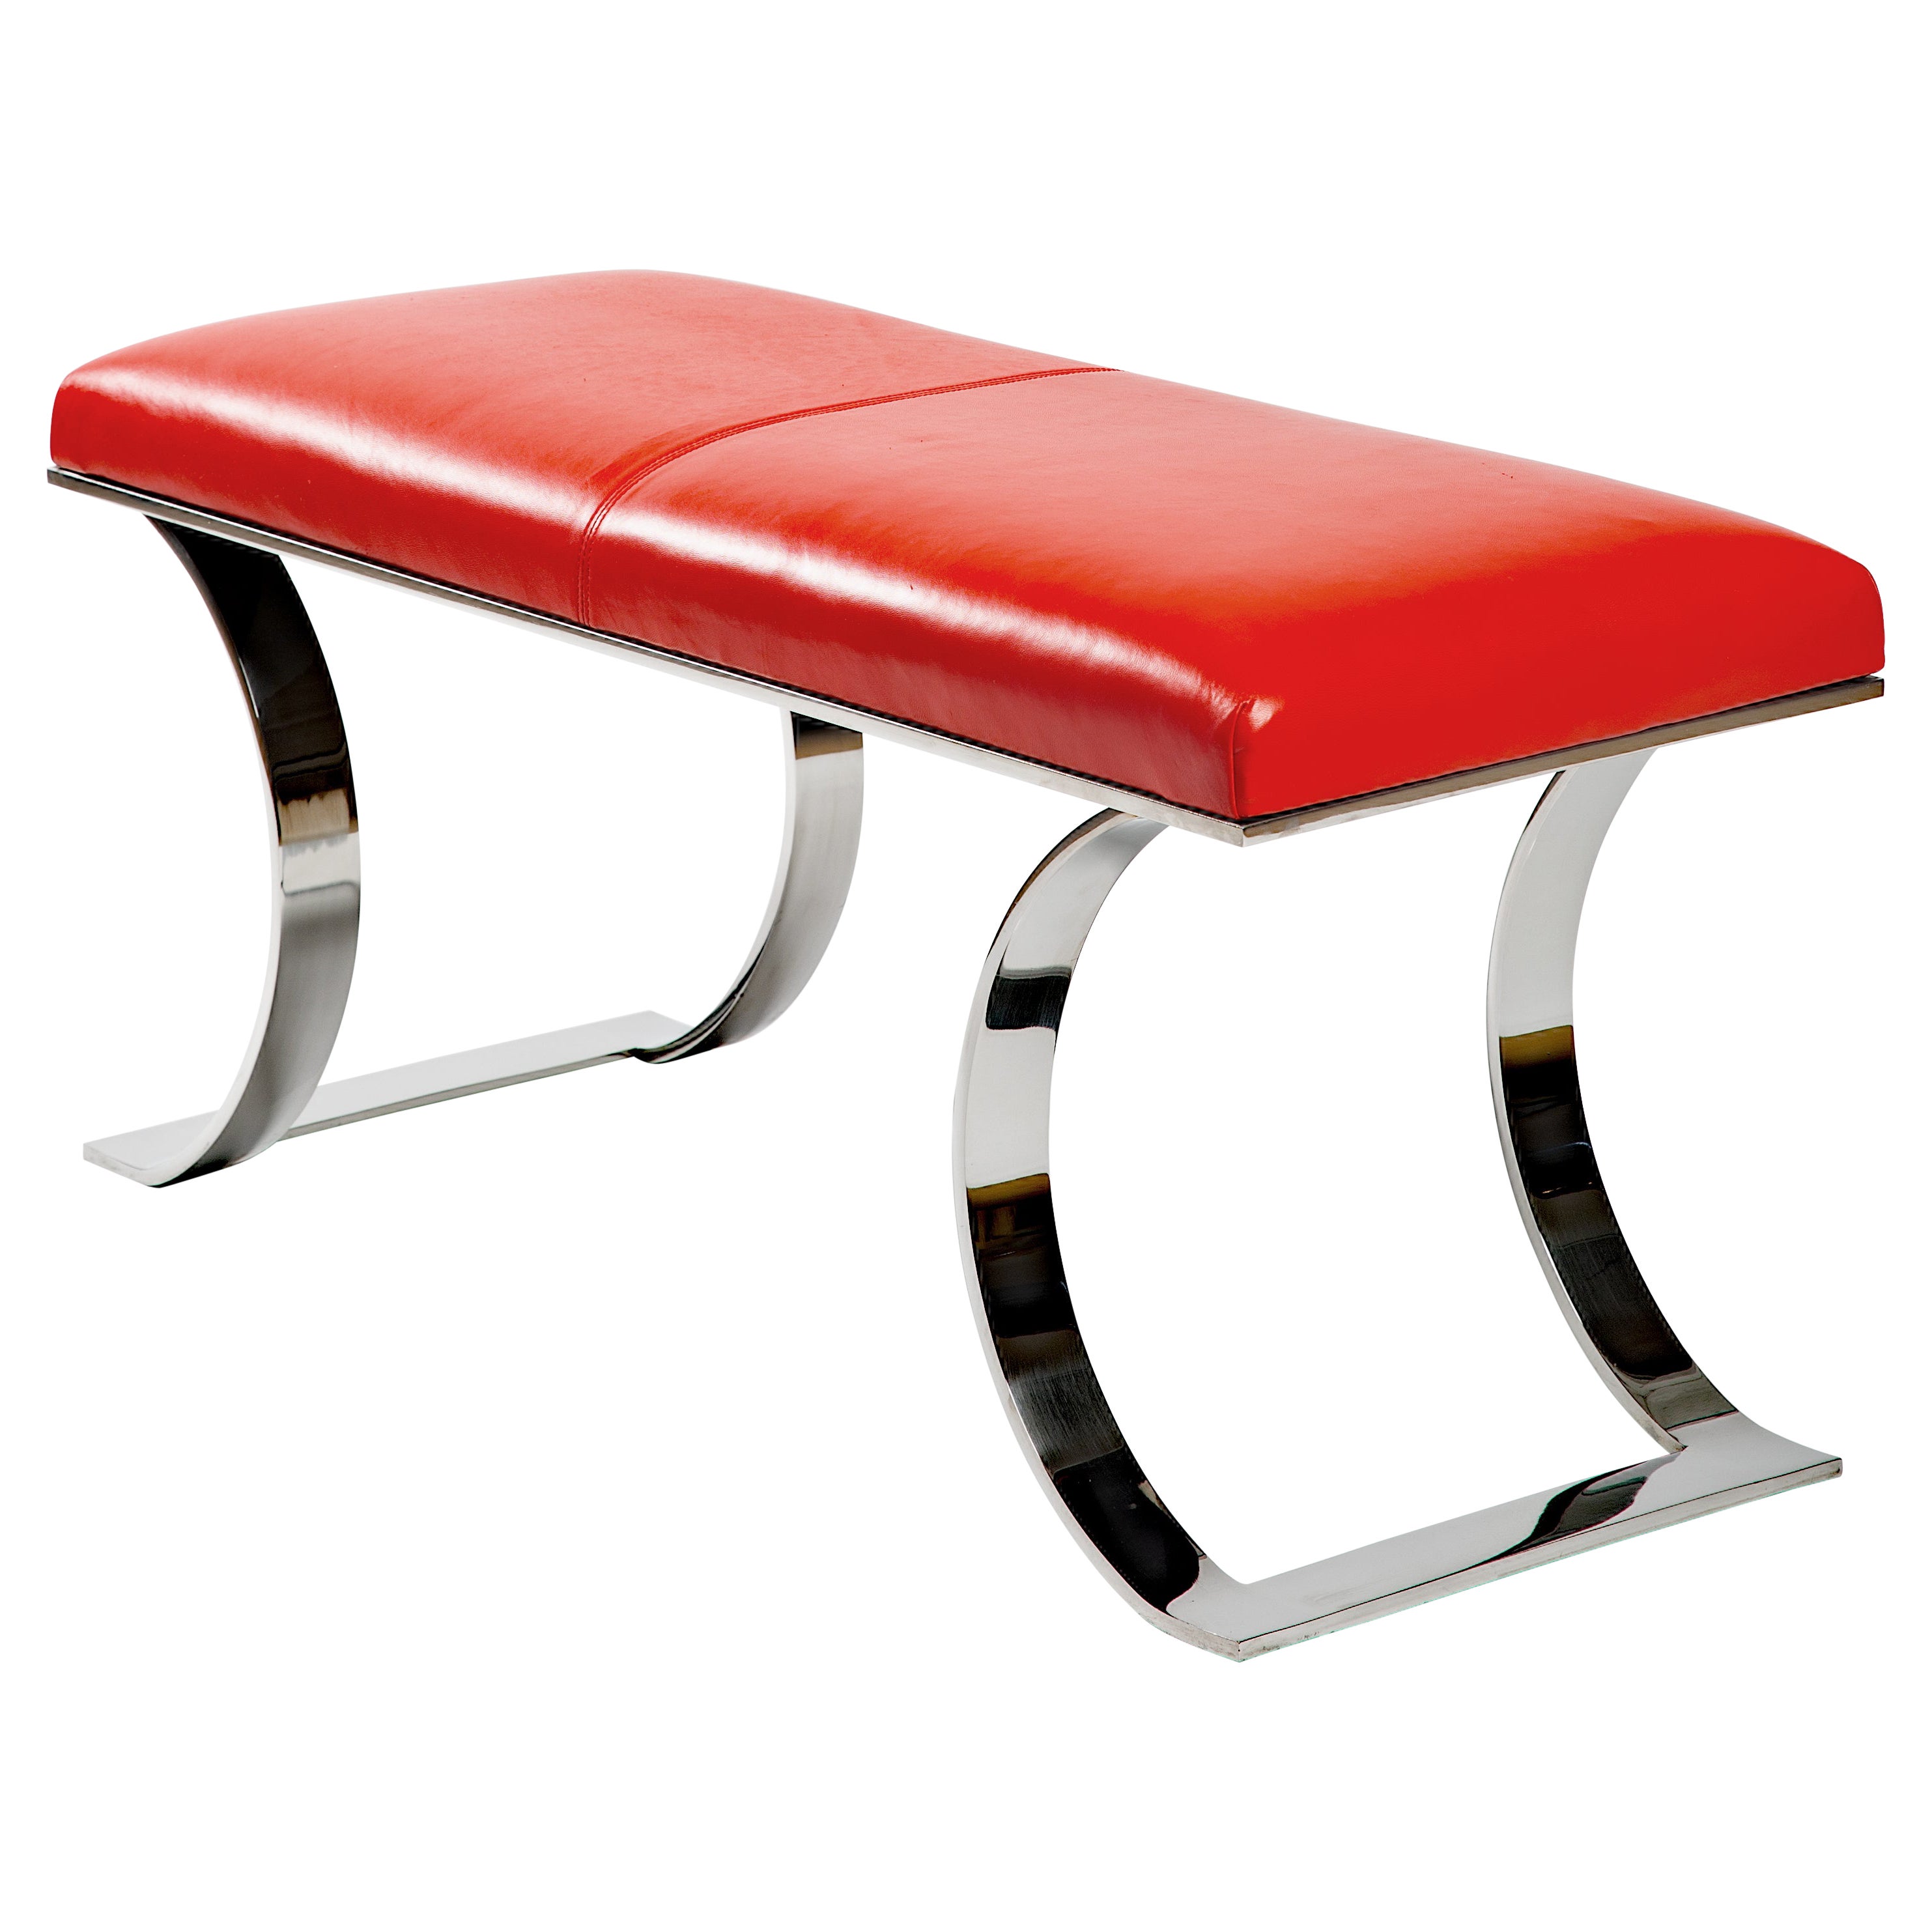 Karl Springer Leather and Polished Stainless Steel Bench